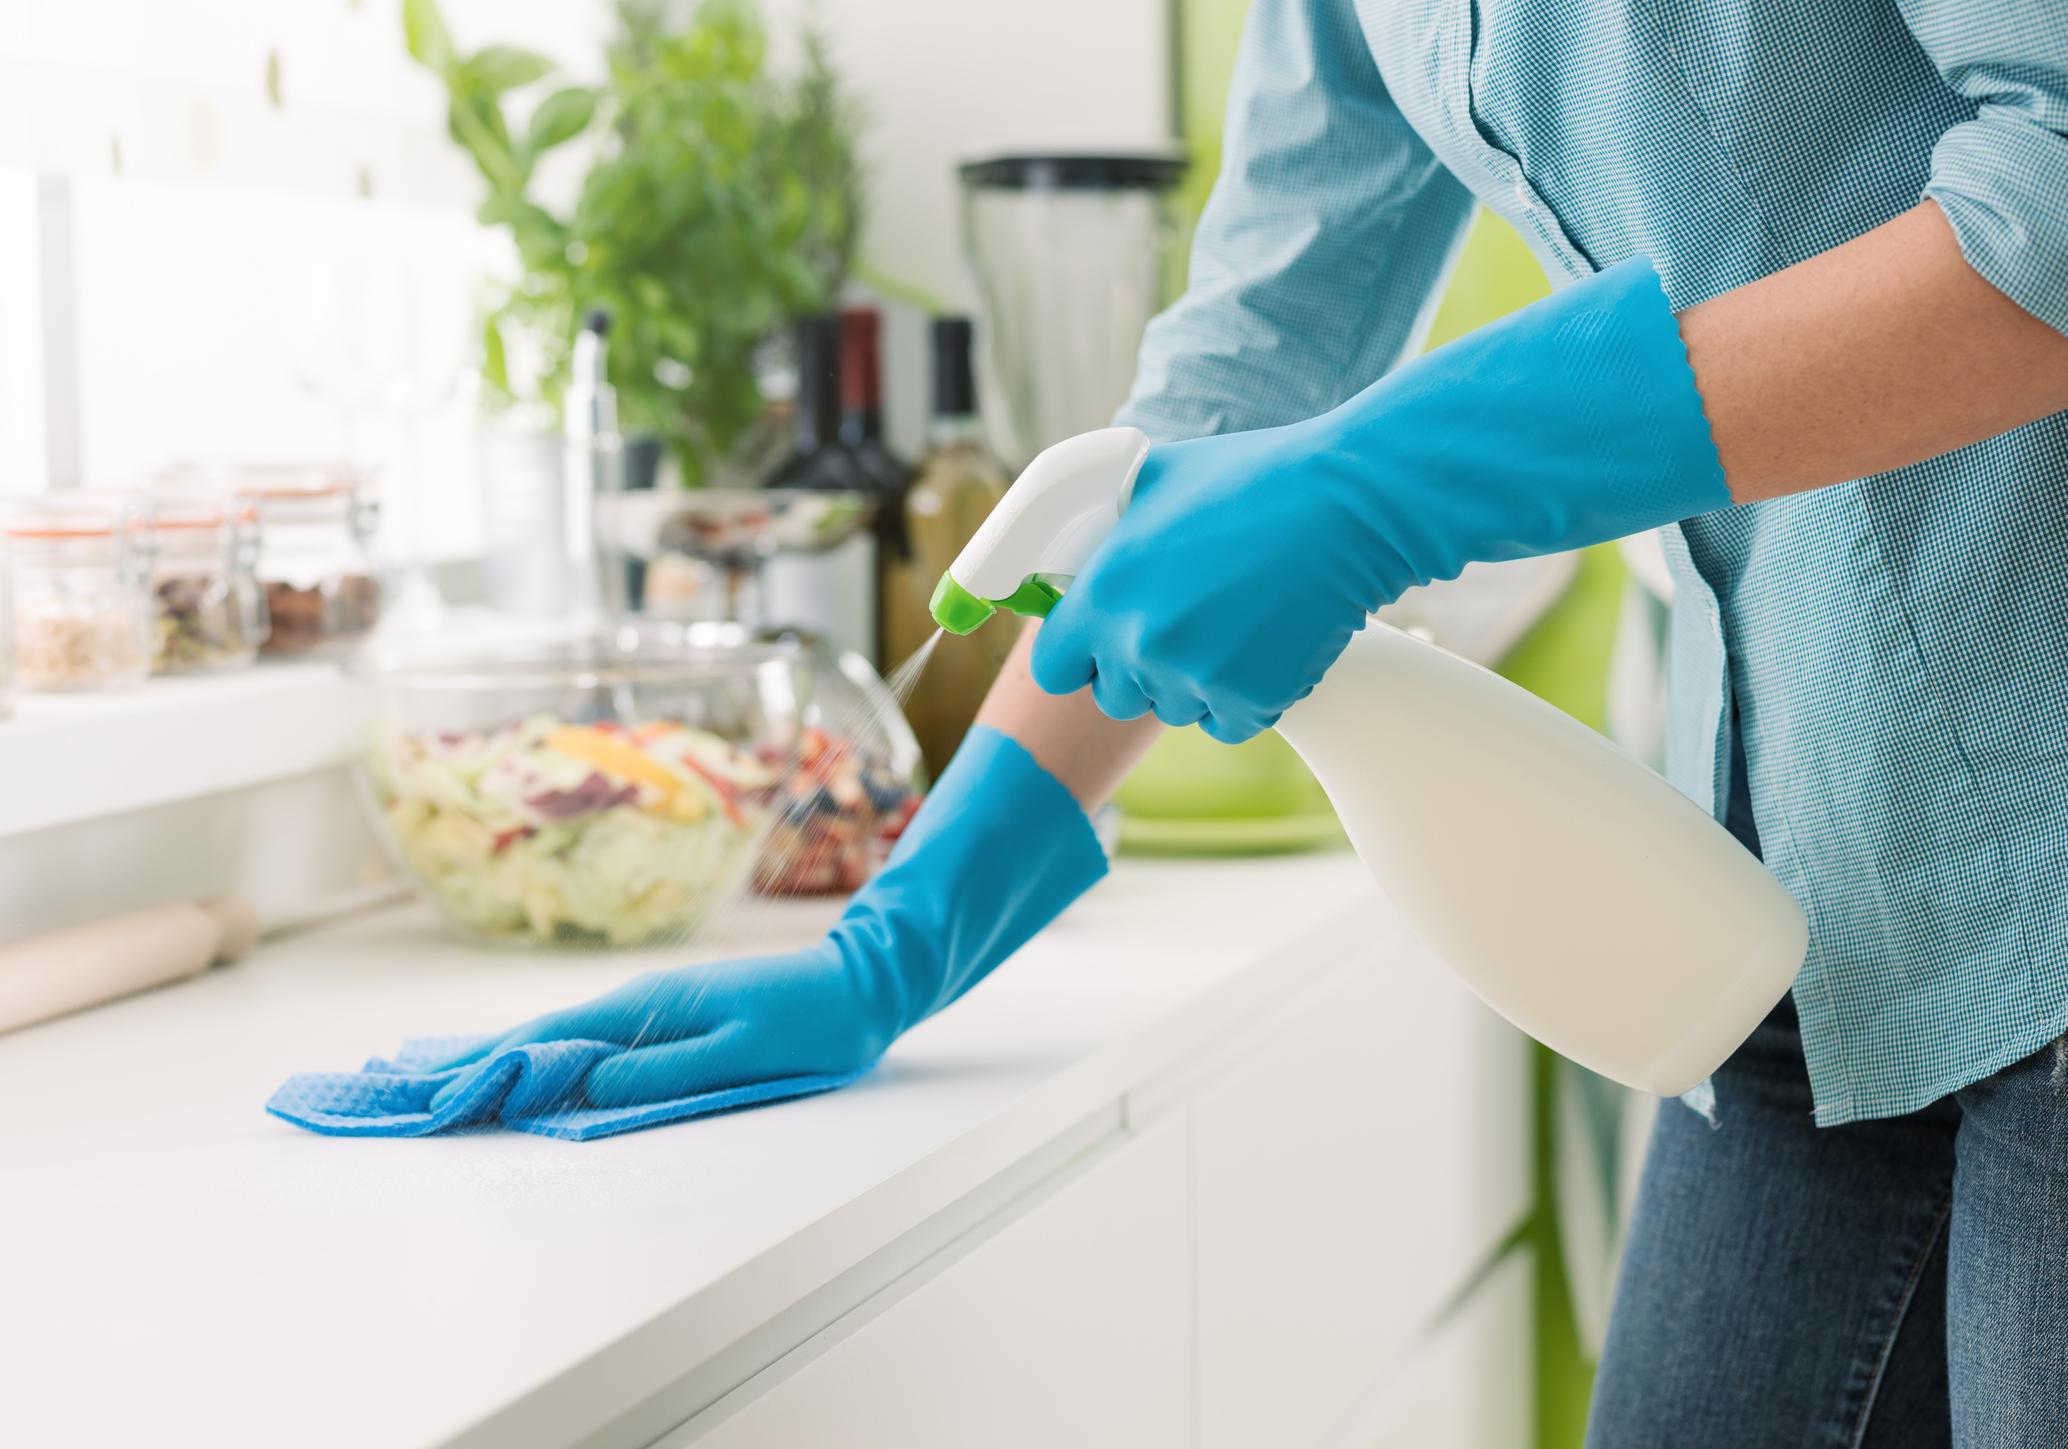 Can Store-Bought Disinfectants Help Combat COVID-19?